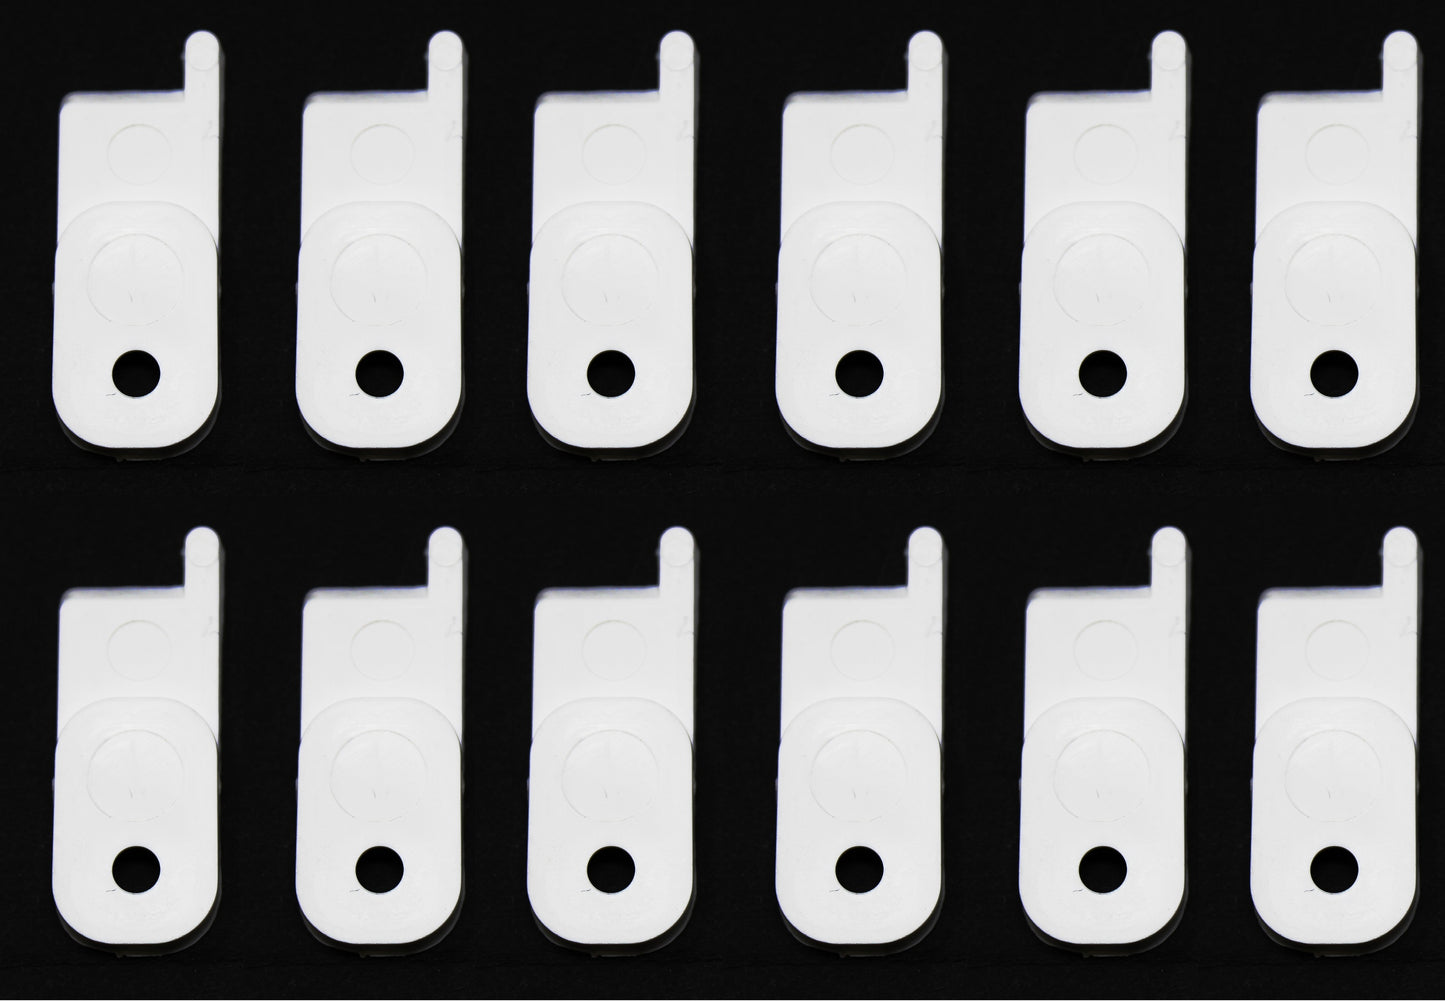 White Toggle Switch Plate Cover Guard Keeps Light Switch ON or Off -Multi Pack